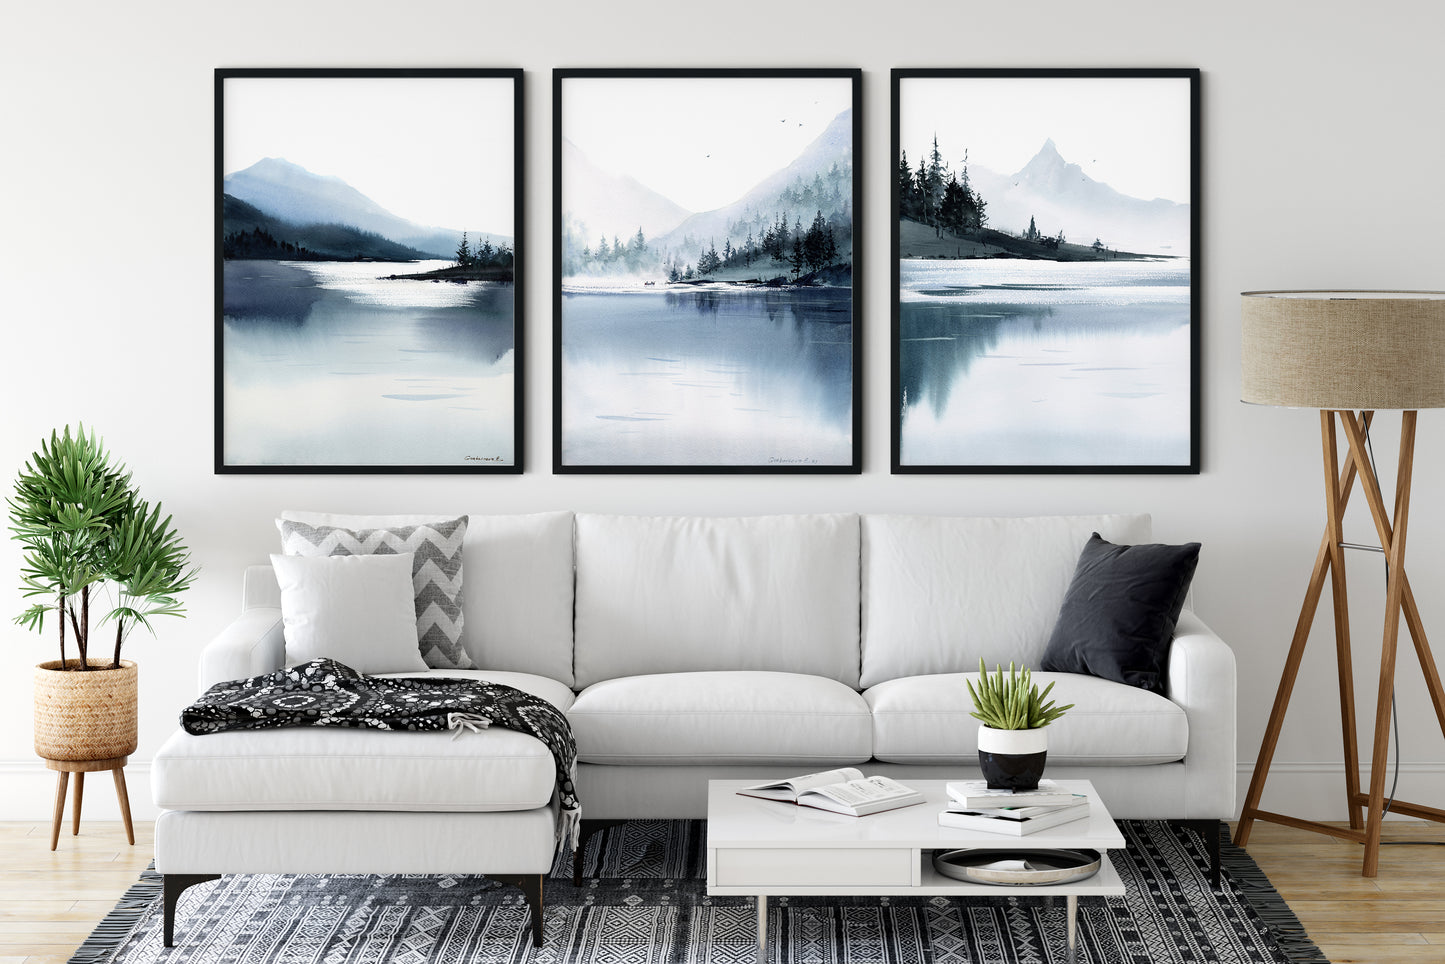 Modern Nature Set of 3 Misty Mountain Art Prints, Monochrome Abstract Mountains, Minimalist Contemporary Home Office Decor